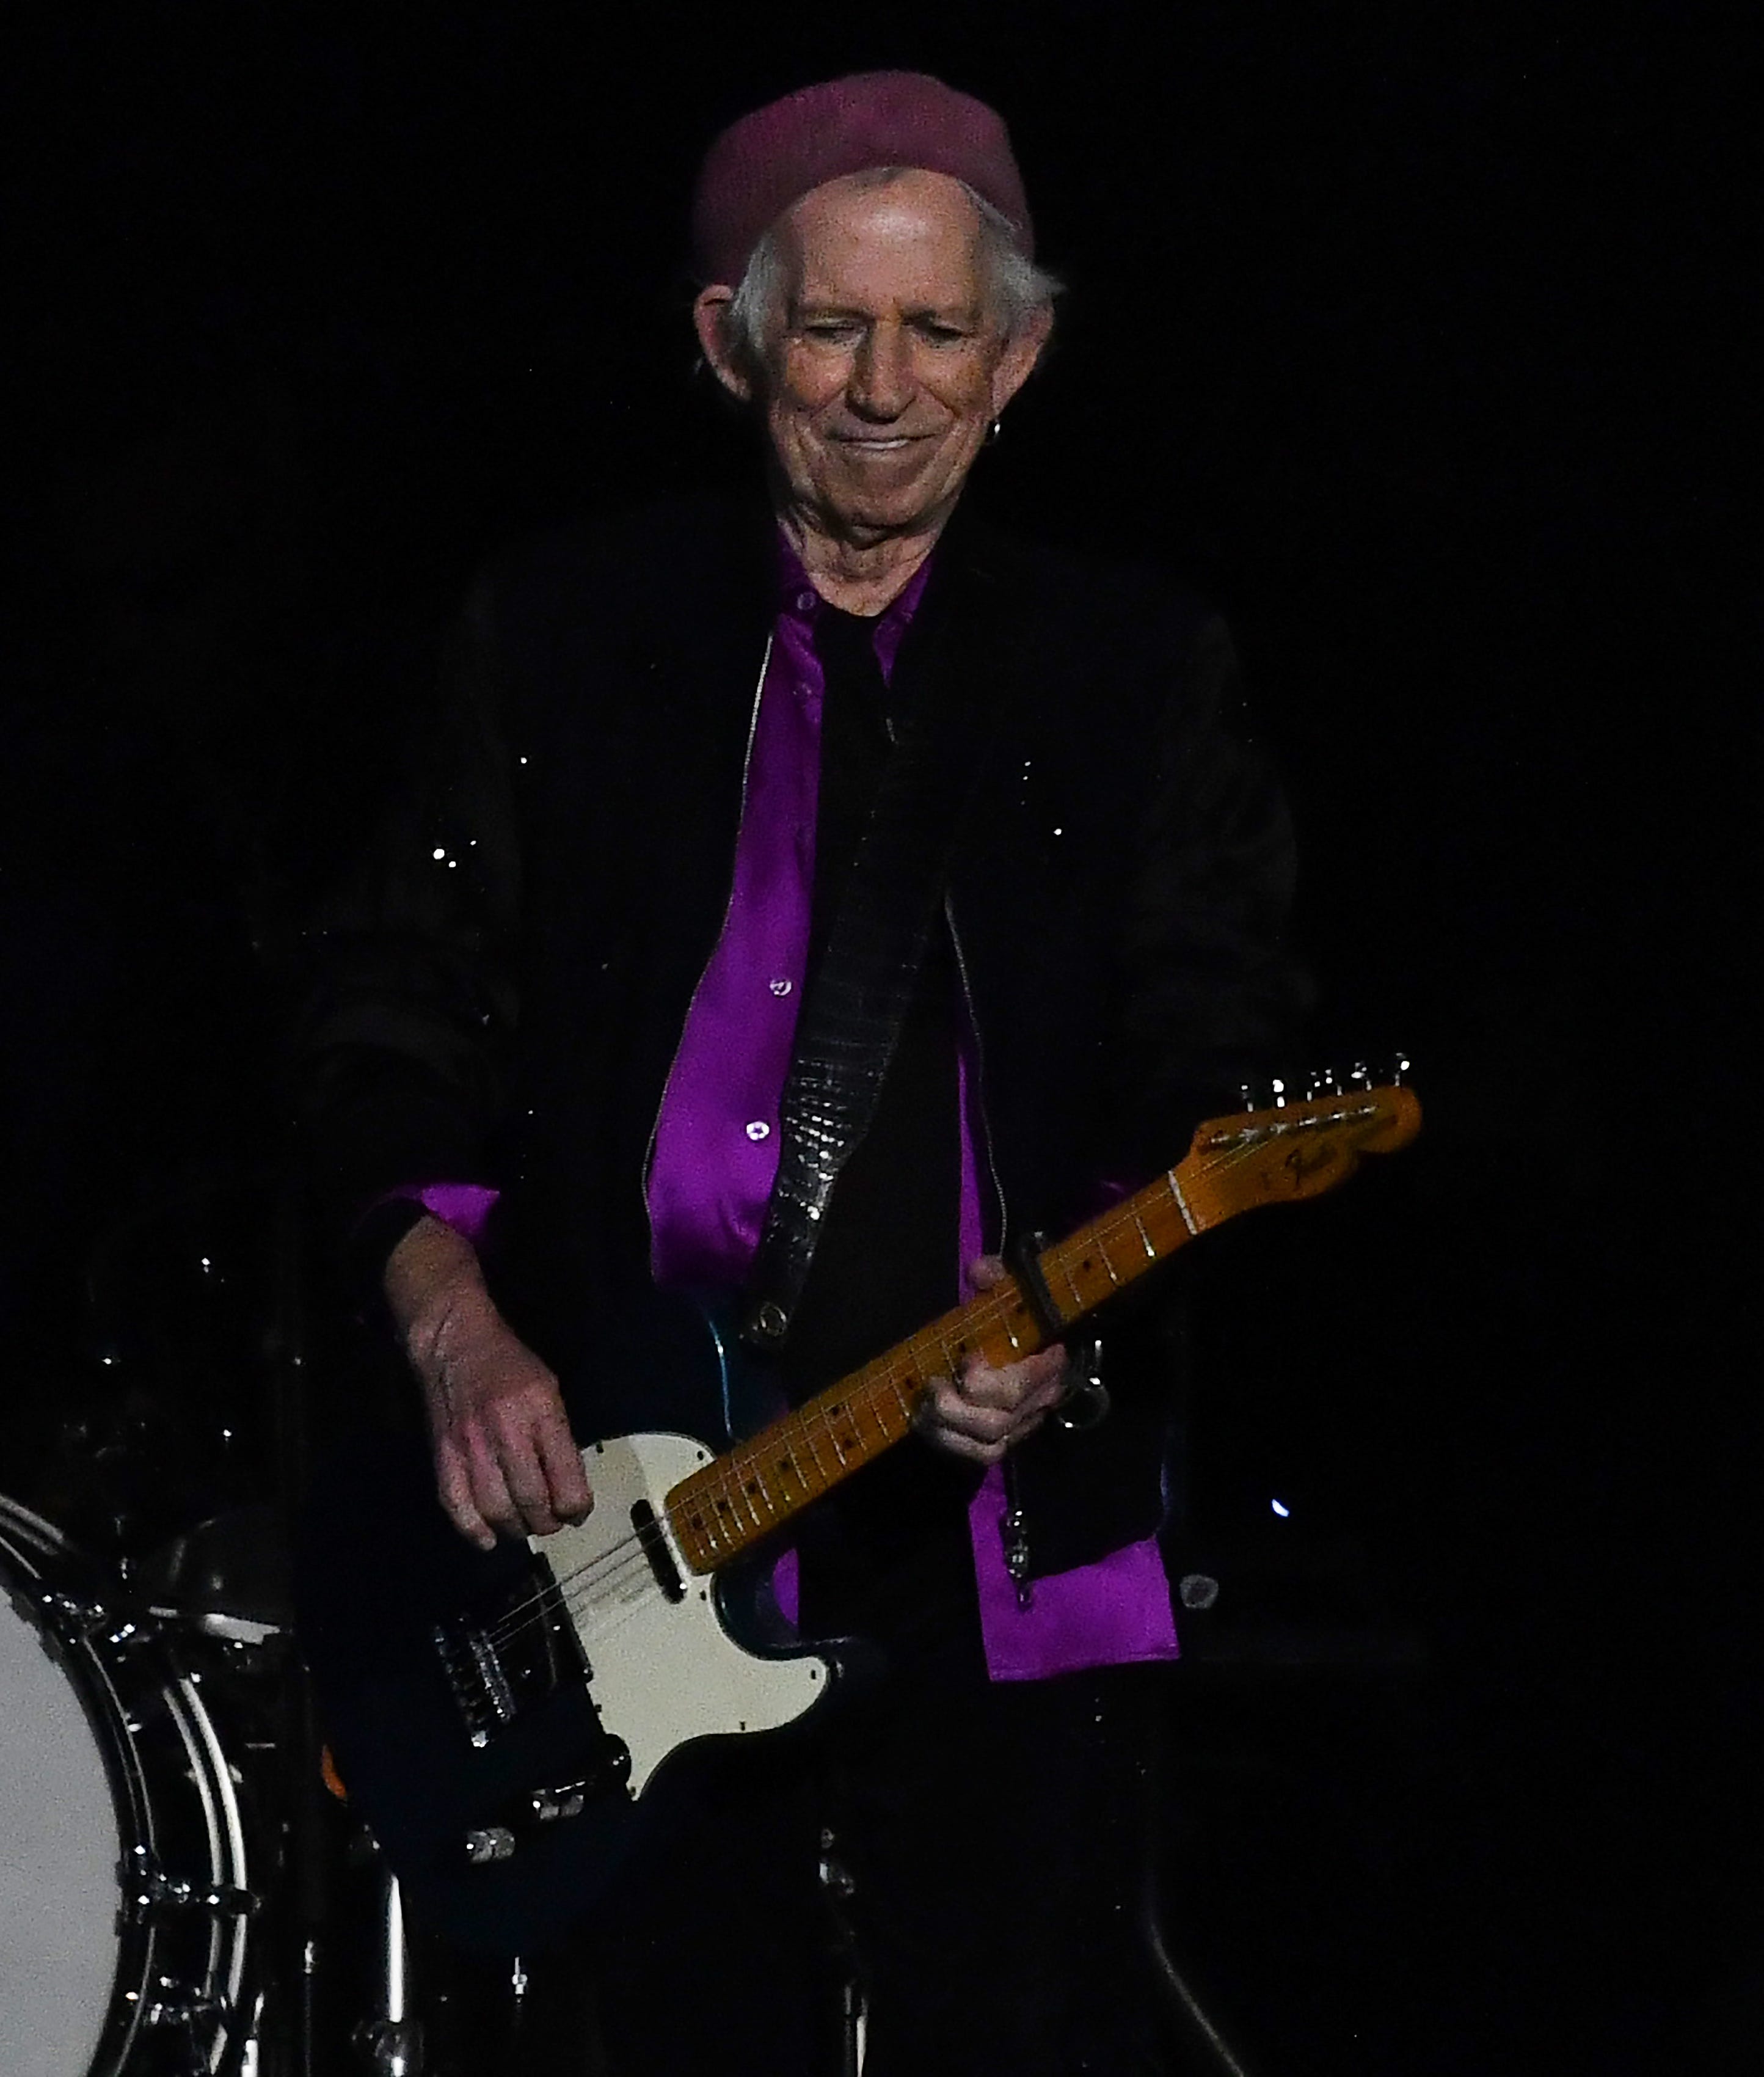 Guitarist Keith Richards smiles as The Rolling Stones take the stage at Ford Field in Detroit on Nov. 15, 2021.